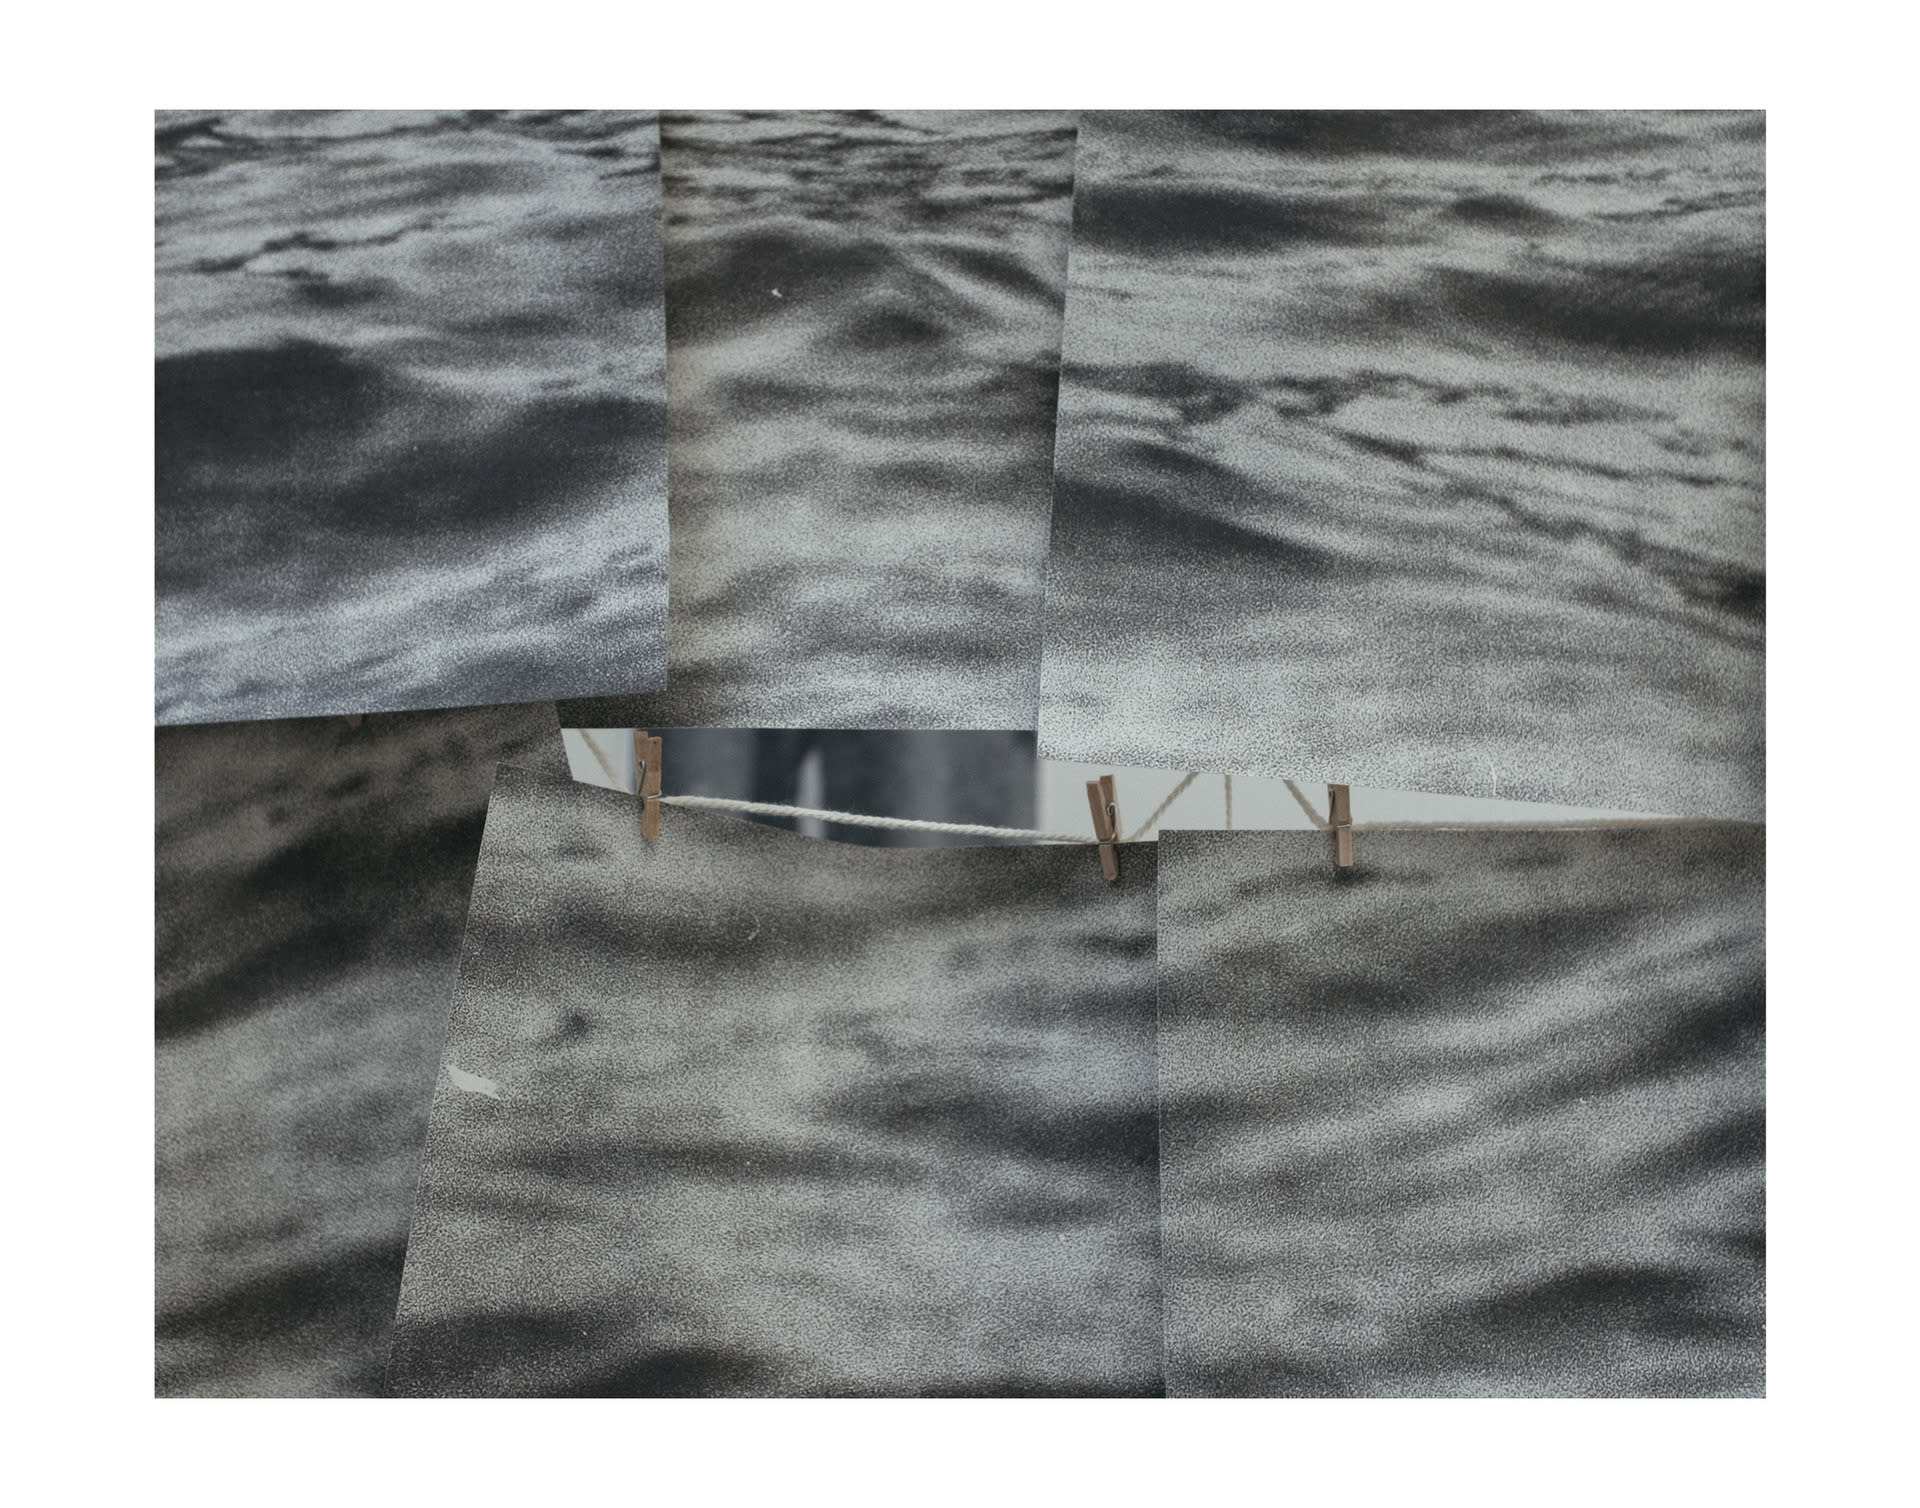 Fragmented Ocean, images contained in rice paper